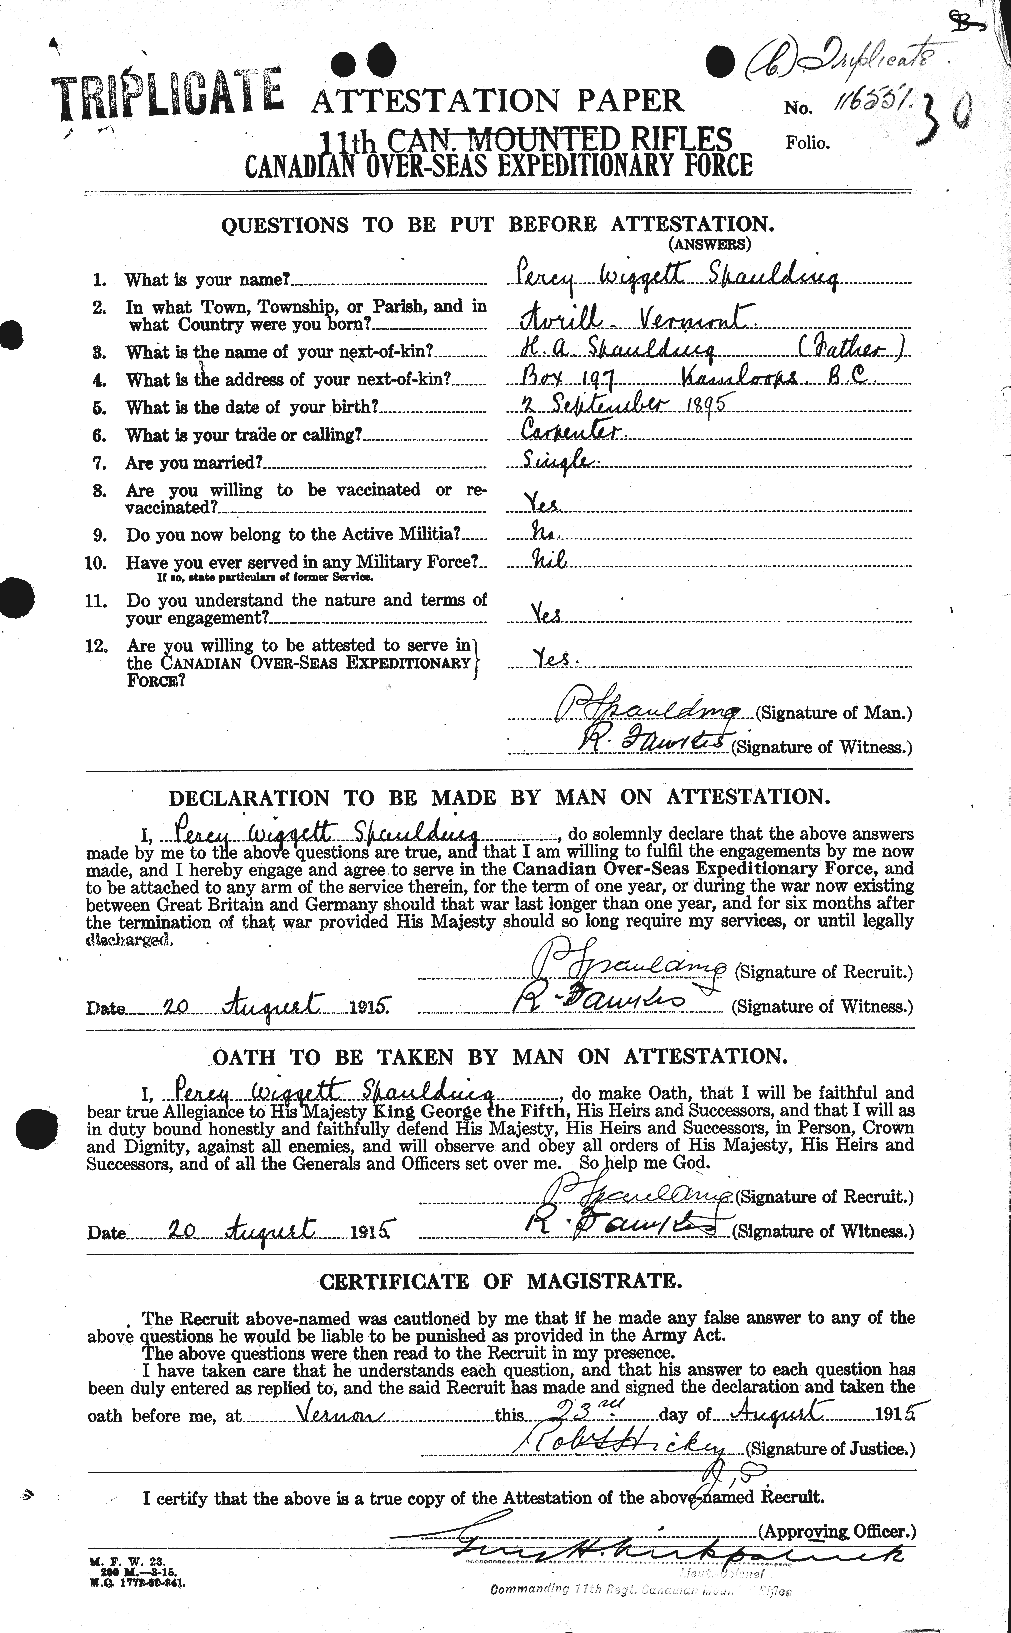 Personnel Records of the First World War - CEF 111251a